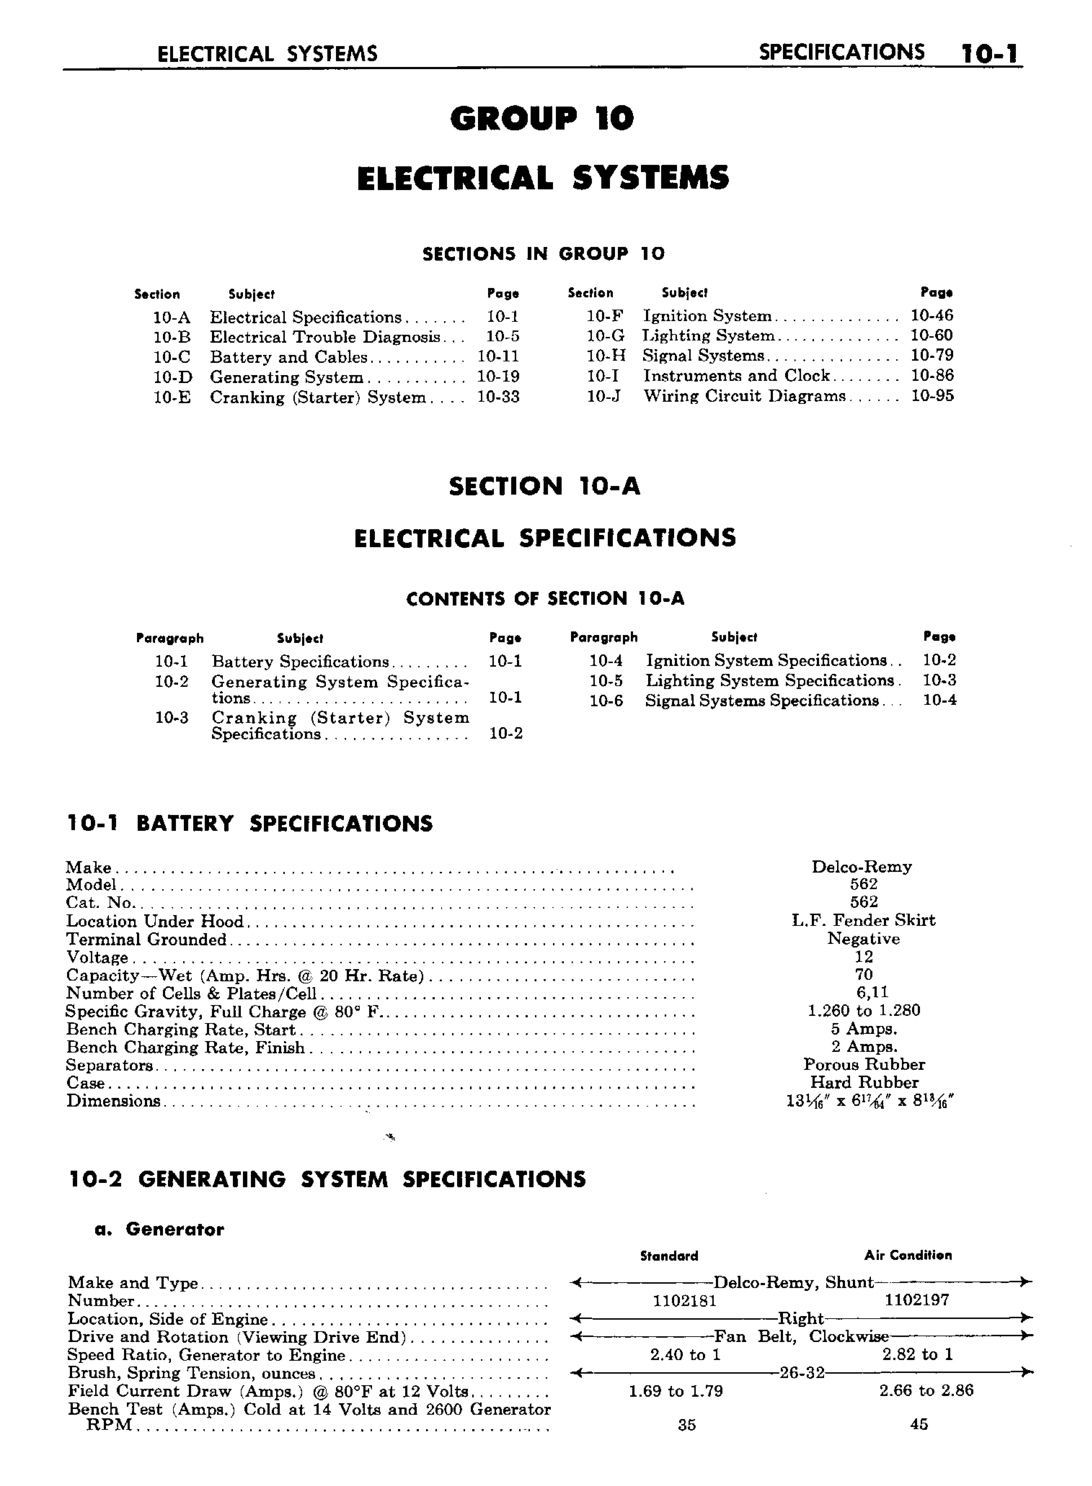 n_11 1960 Buick Shop Manual - Electrical Systems-001-001.jpg